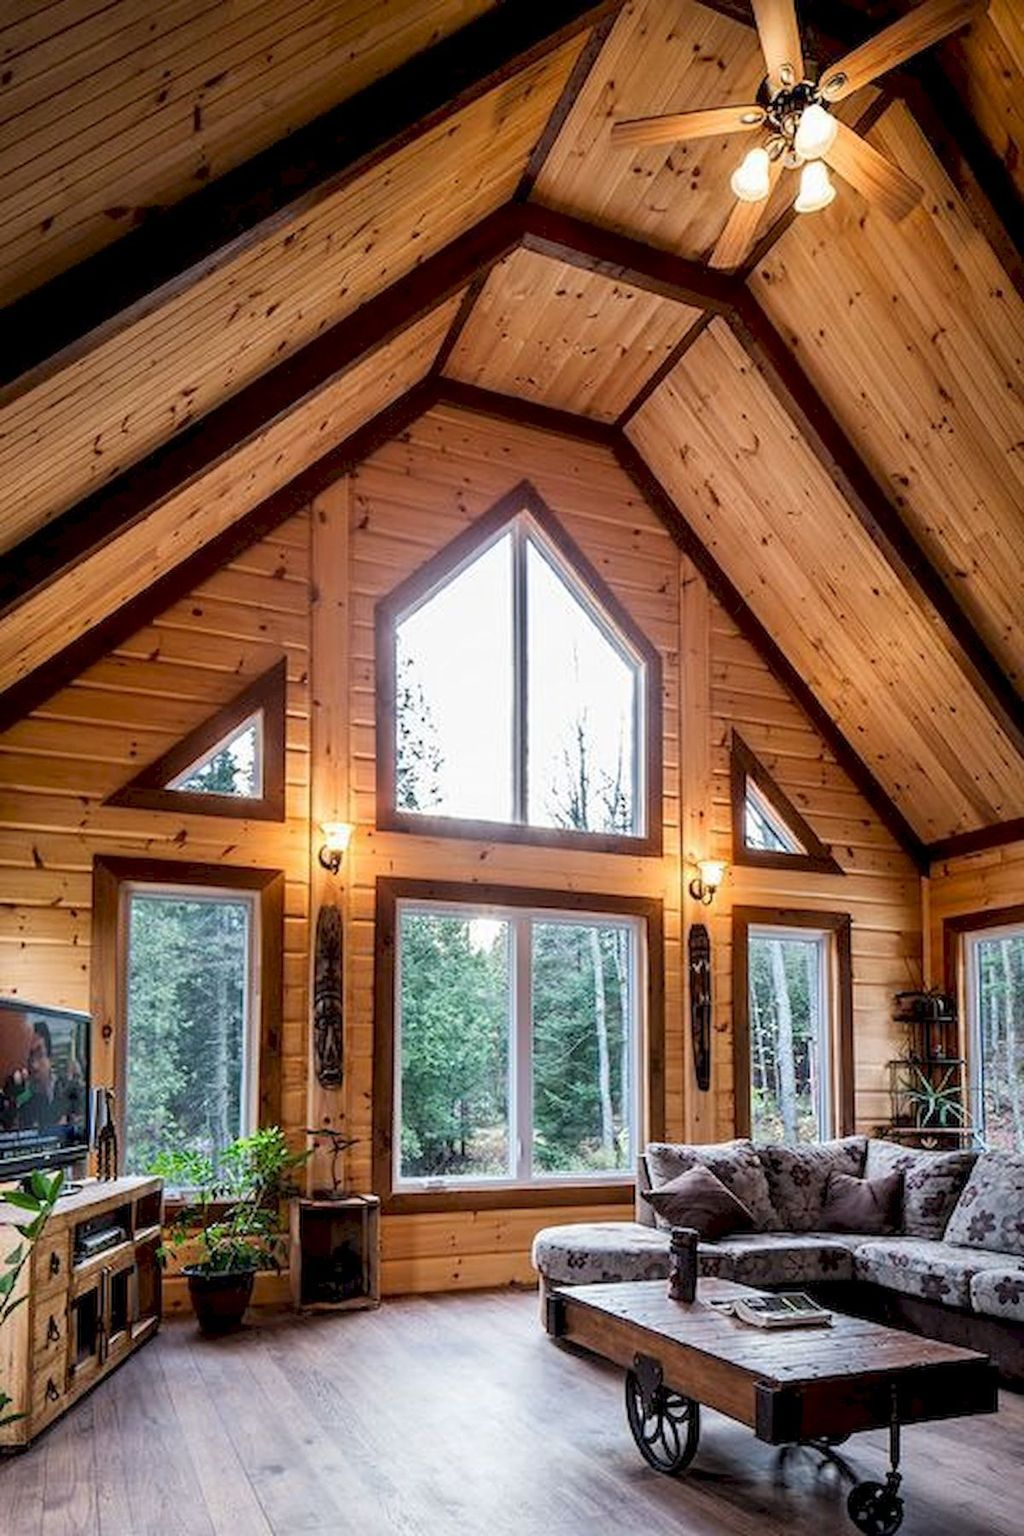 Gorgeous Log Cabin Style Home Interior Design18